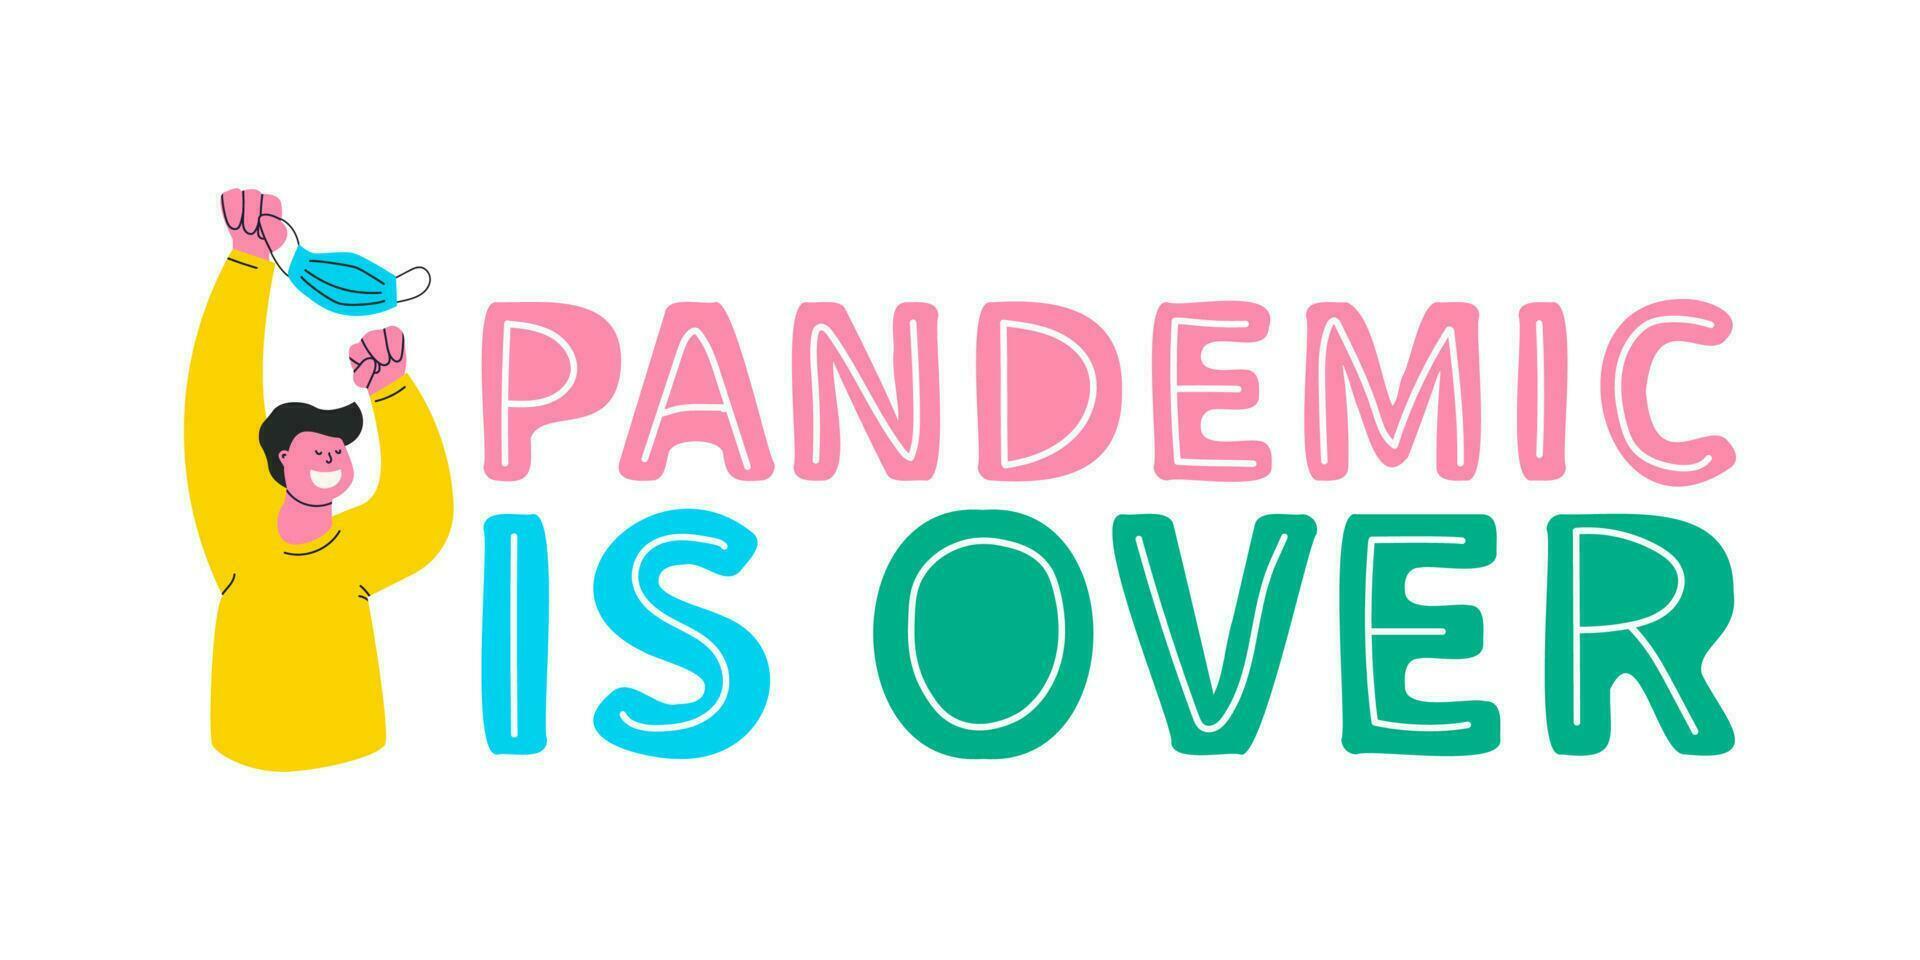 Pandemic is over. Happy guy takes off his protective mask and waves it over his head. Lettering and illustration. Vector color banner about end of quarantine.